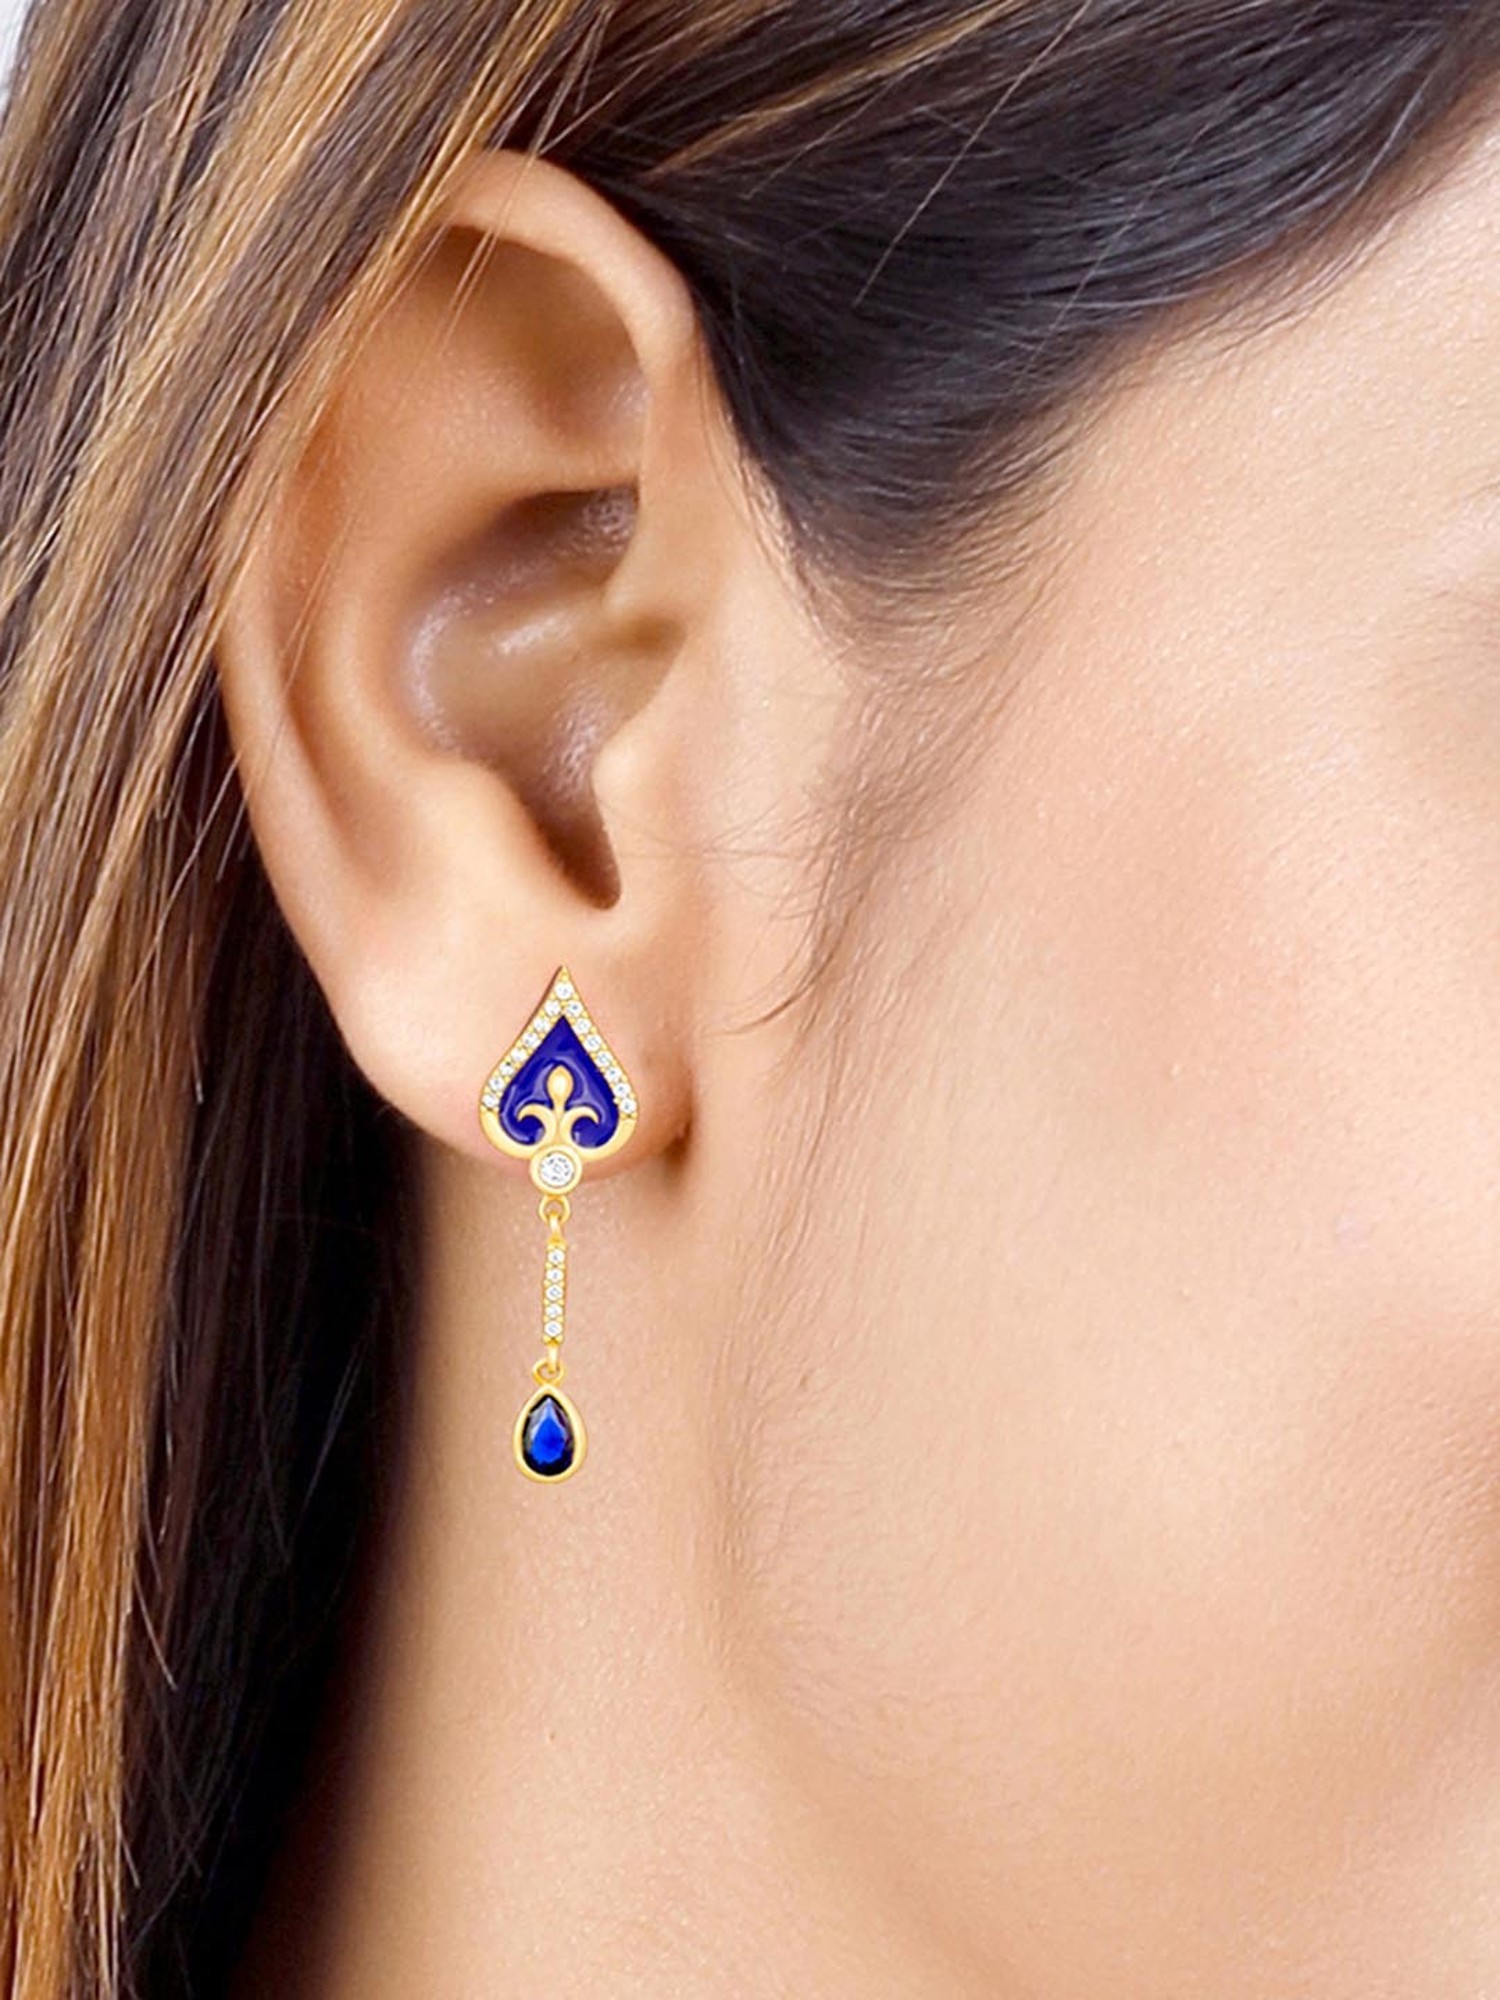 Shop latest blue sapphire silver earrings for women online at low price  Gift Box and Free shipping